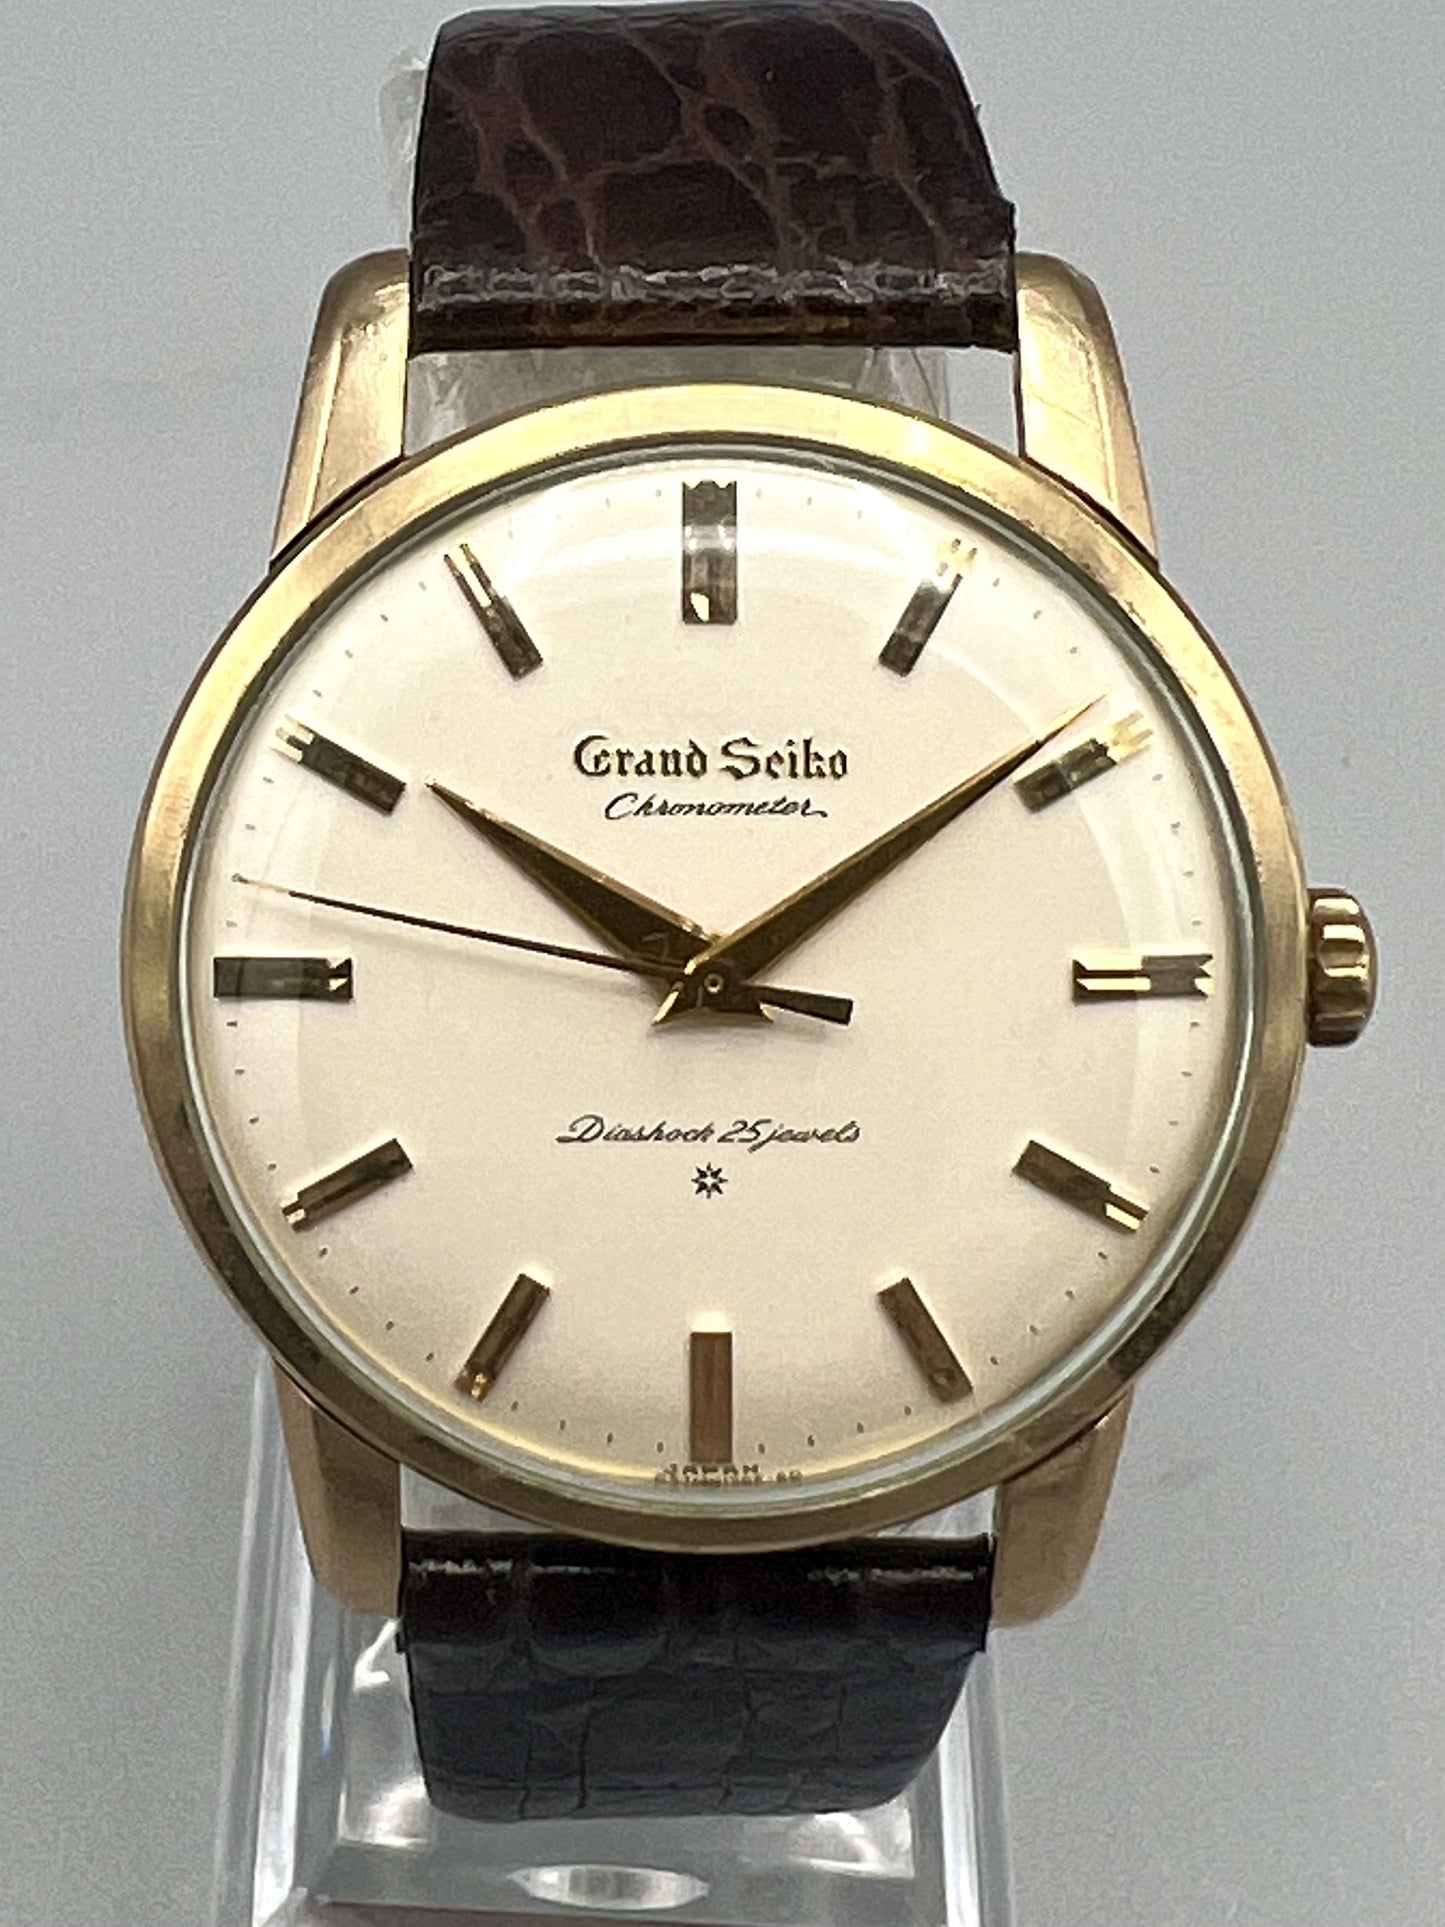 Grand Seiko "First" Ref 3180 SD (Special Dial) Exceptional Condition, 1963